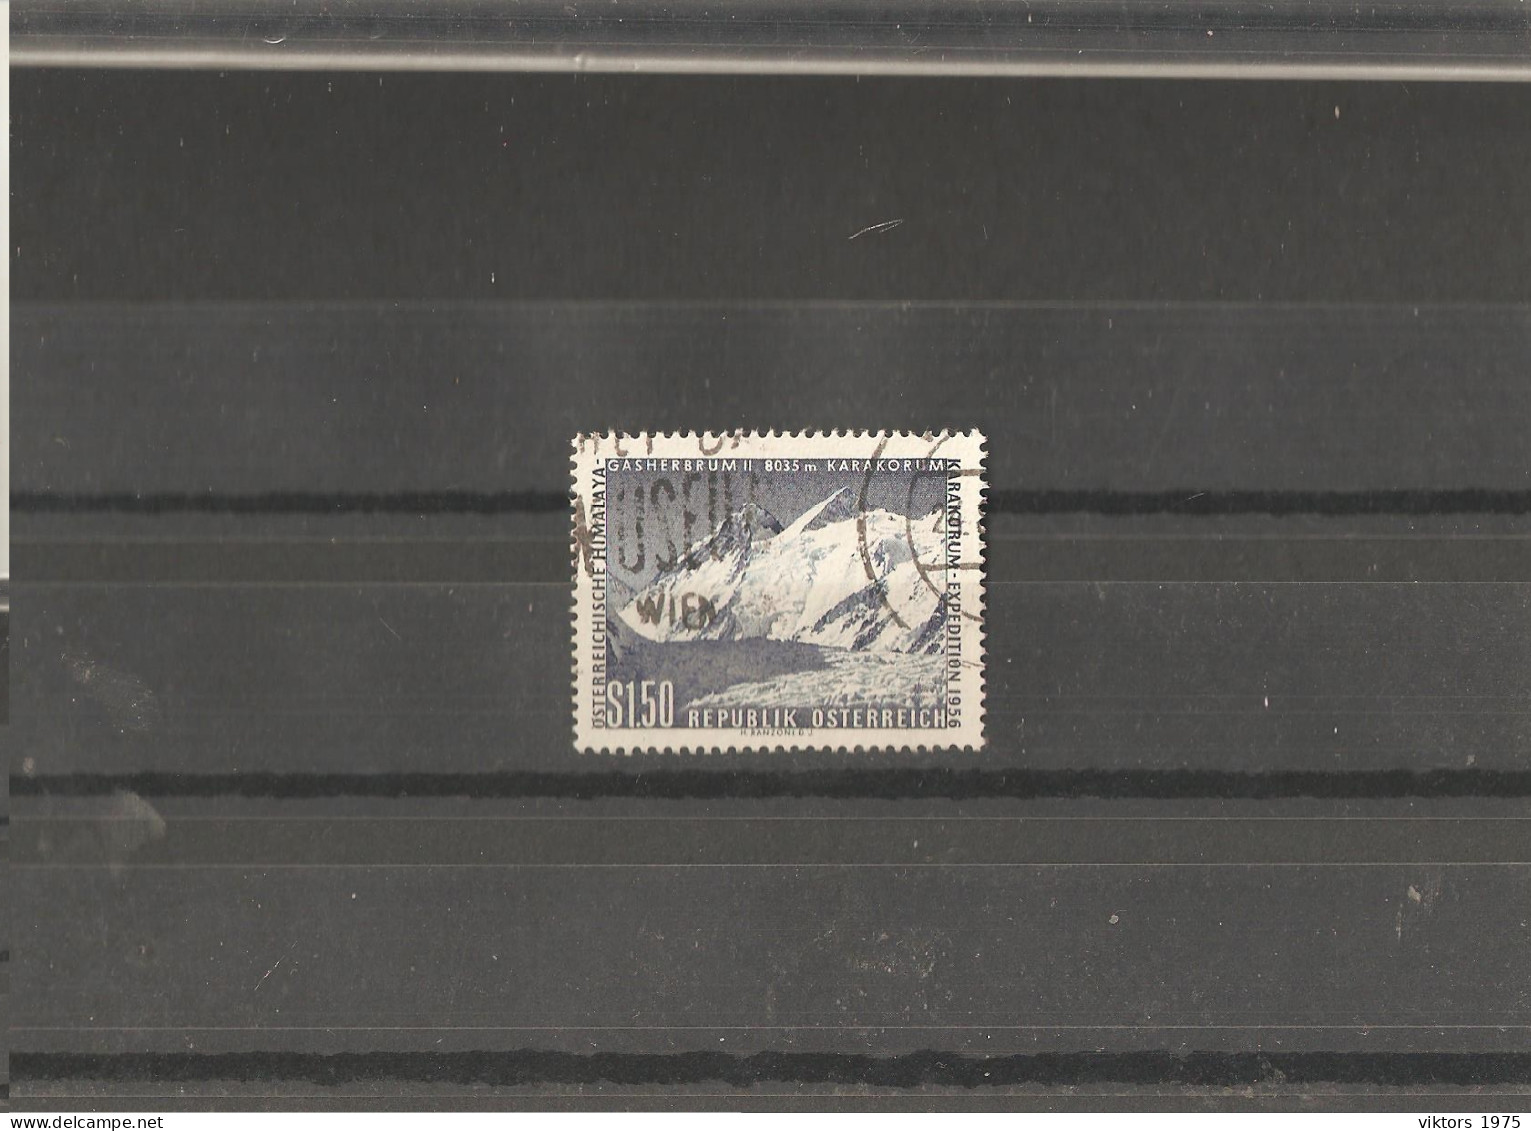 Used Stamp Nr.1036 In MICHEL Catalog - Used Stamps